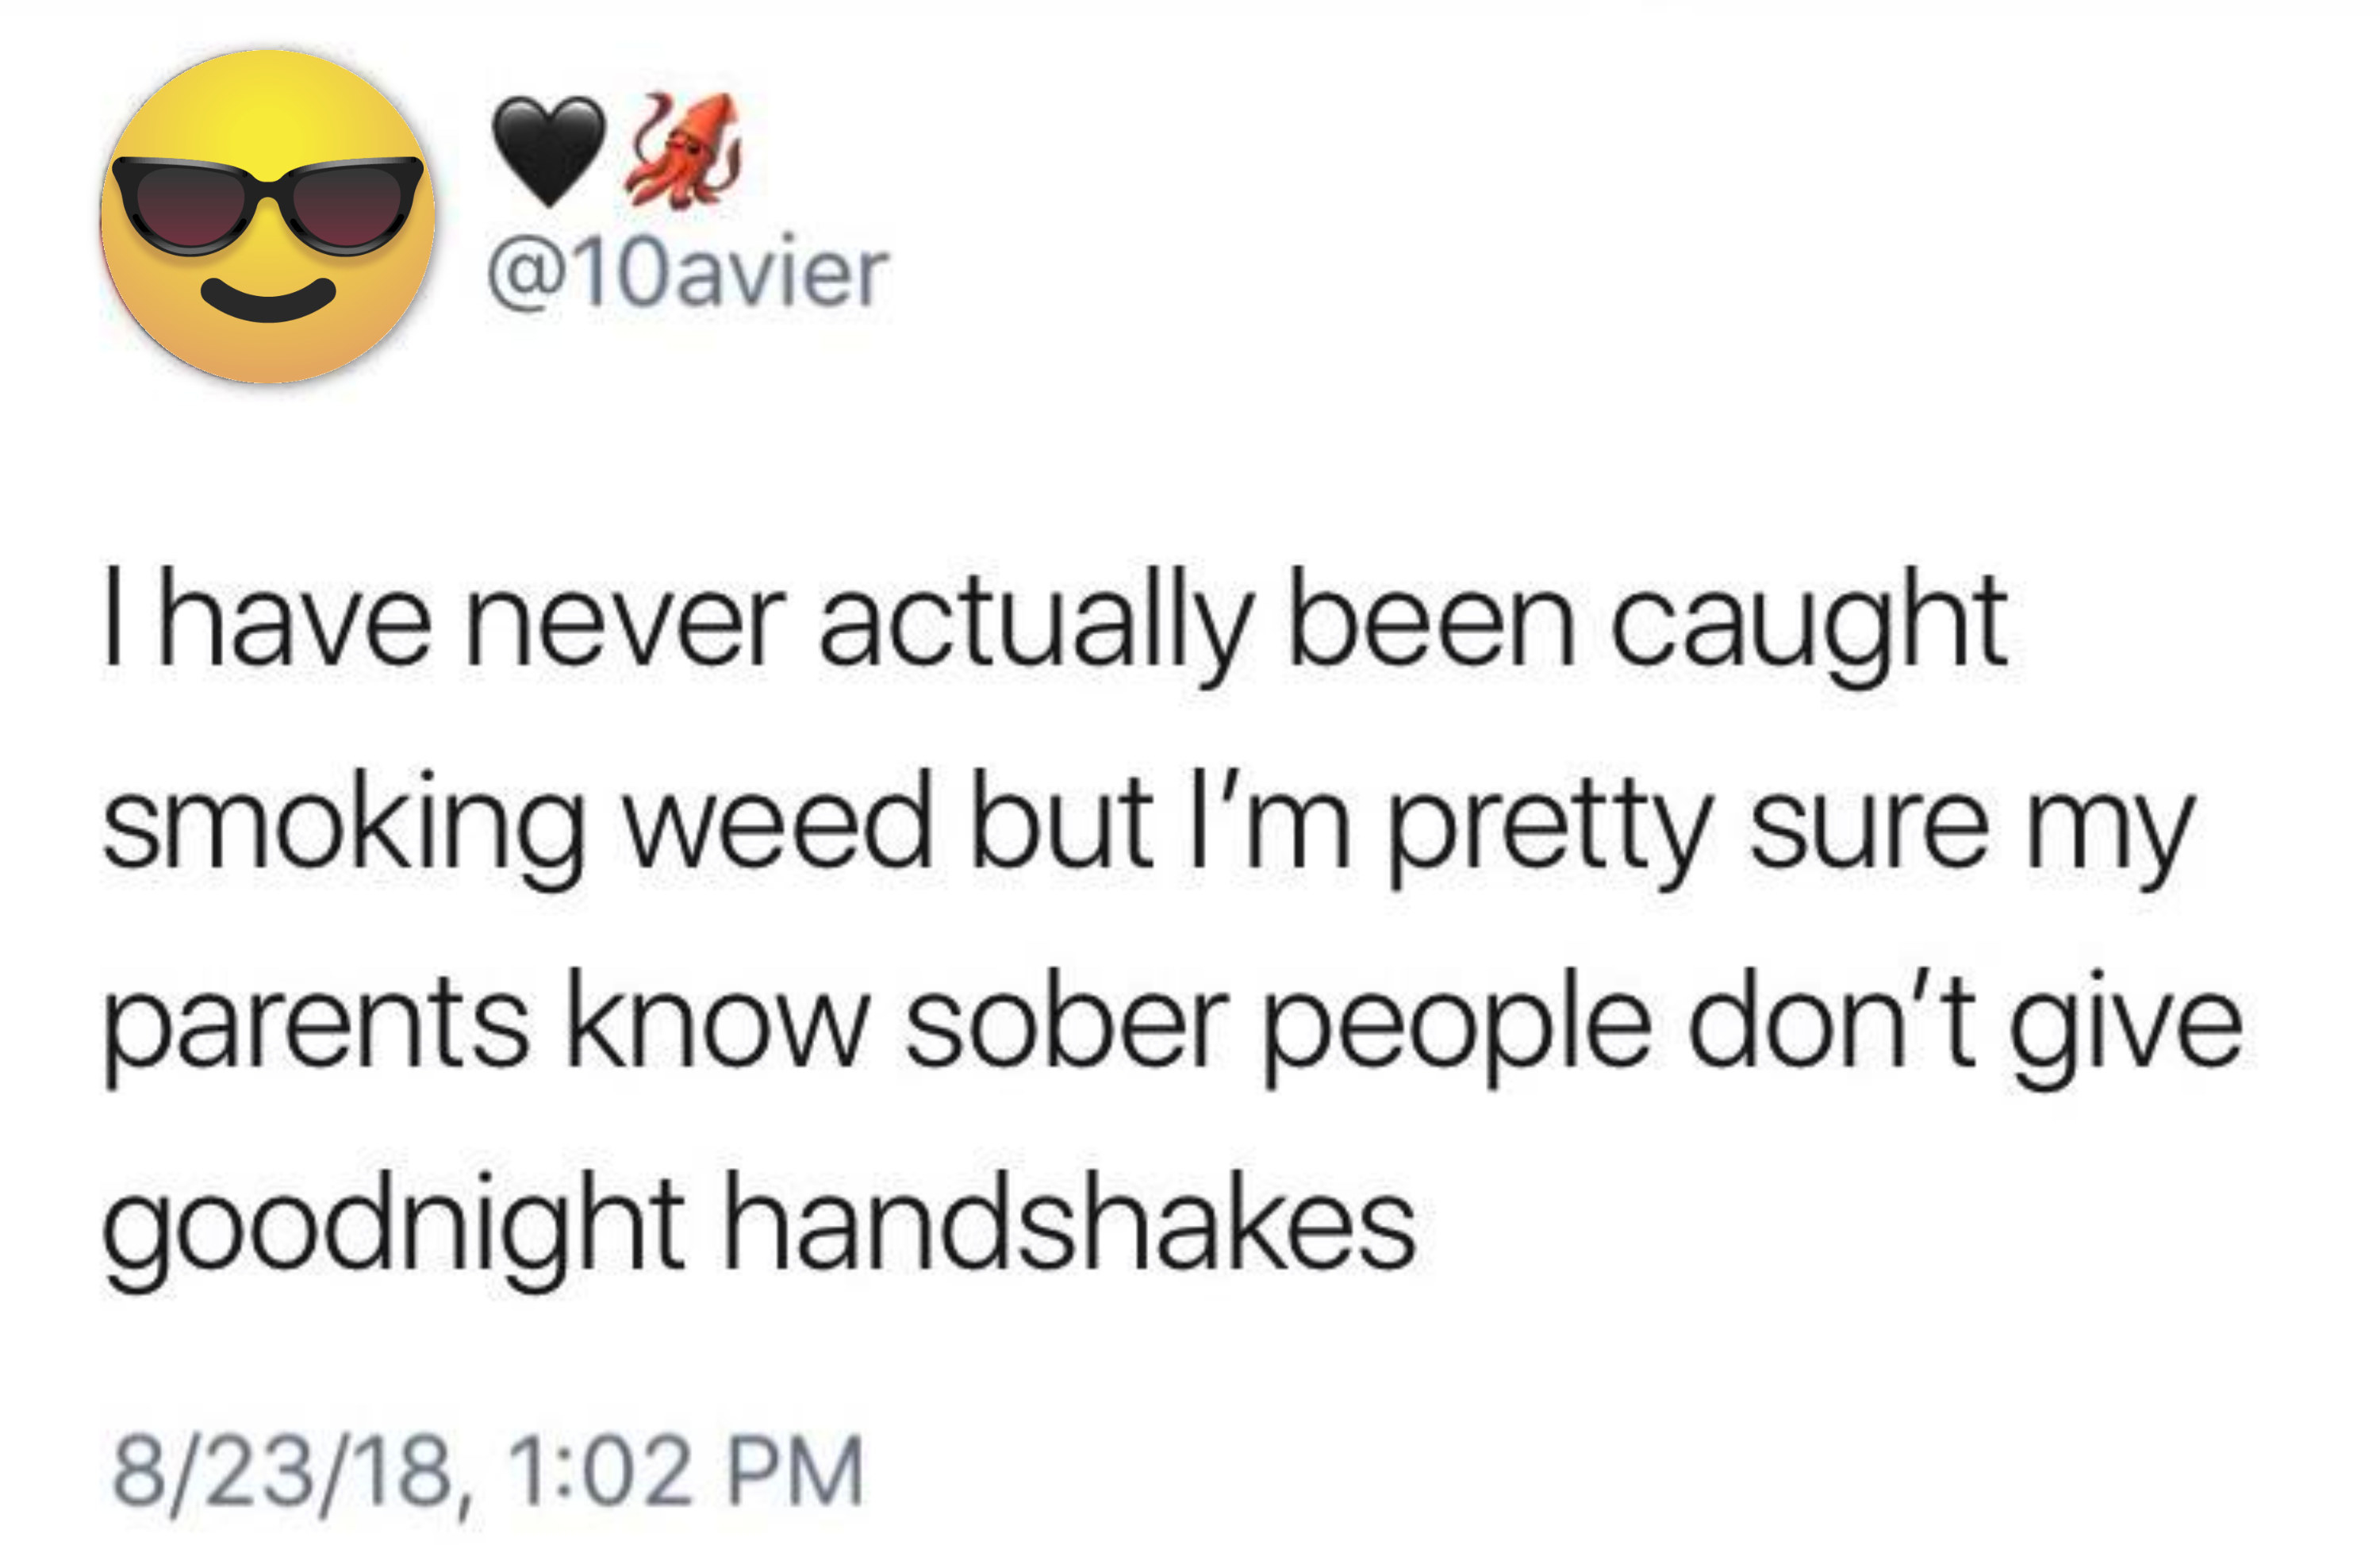 person who was so high they gave a goodnight handshake